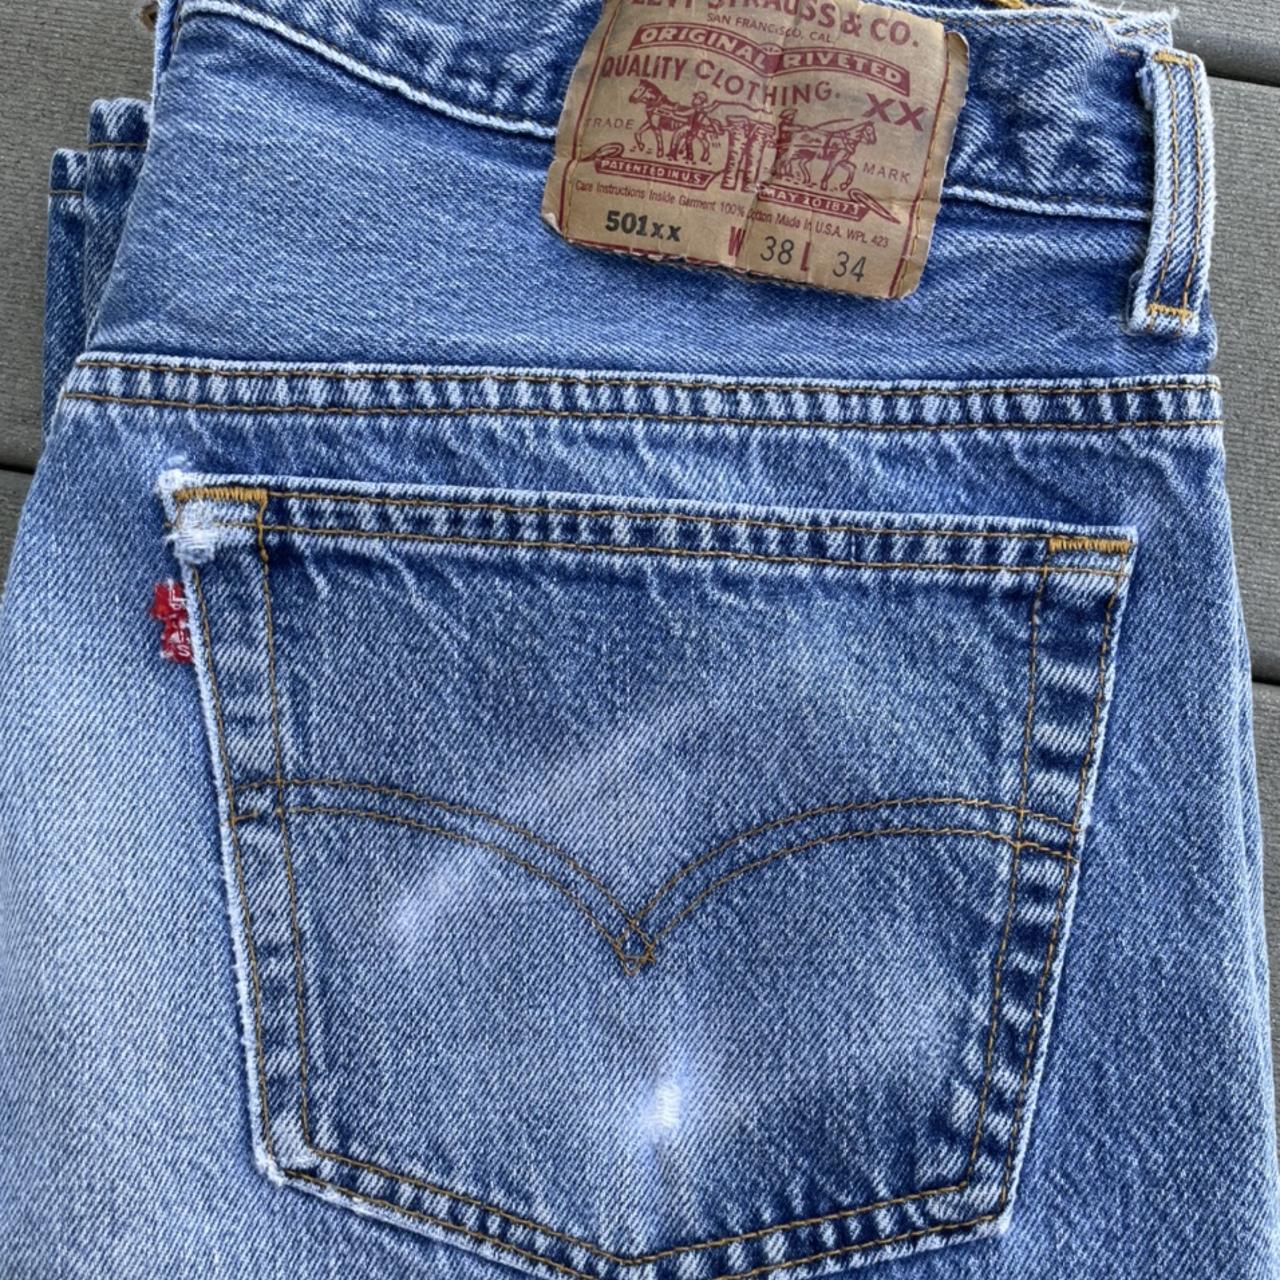 90s Levi’s vintage 501xx made in SF